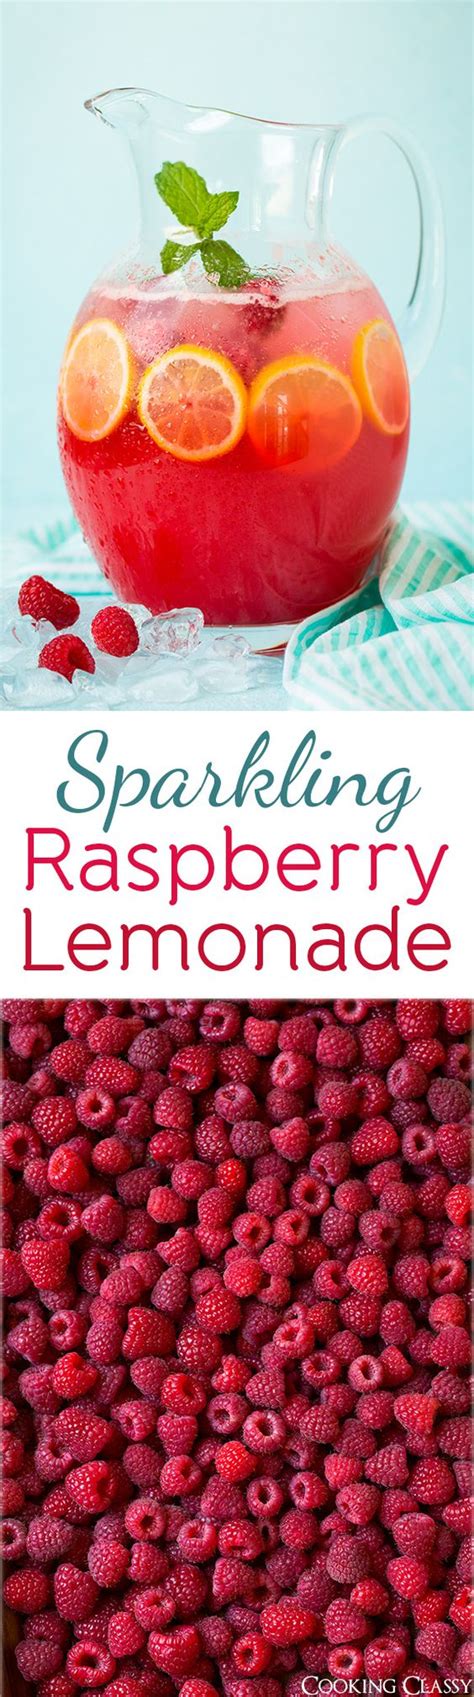 Sparkling Raspberry Lemonade This Is So Vibrant And